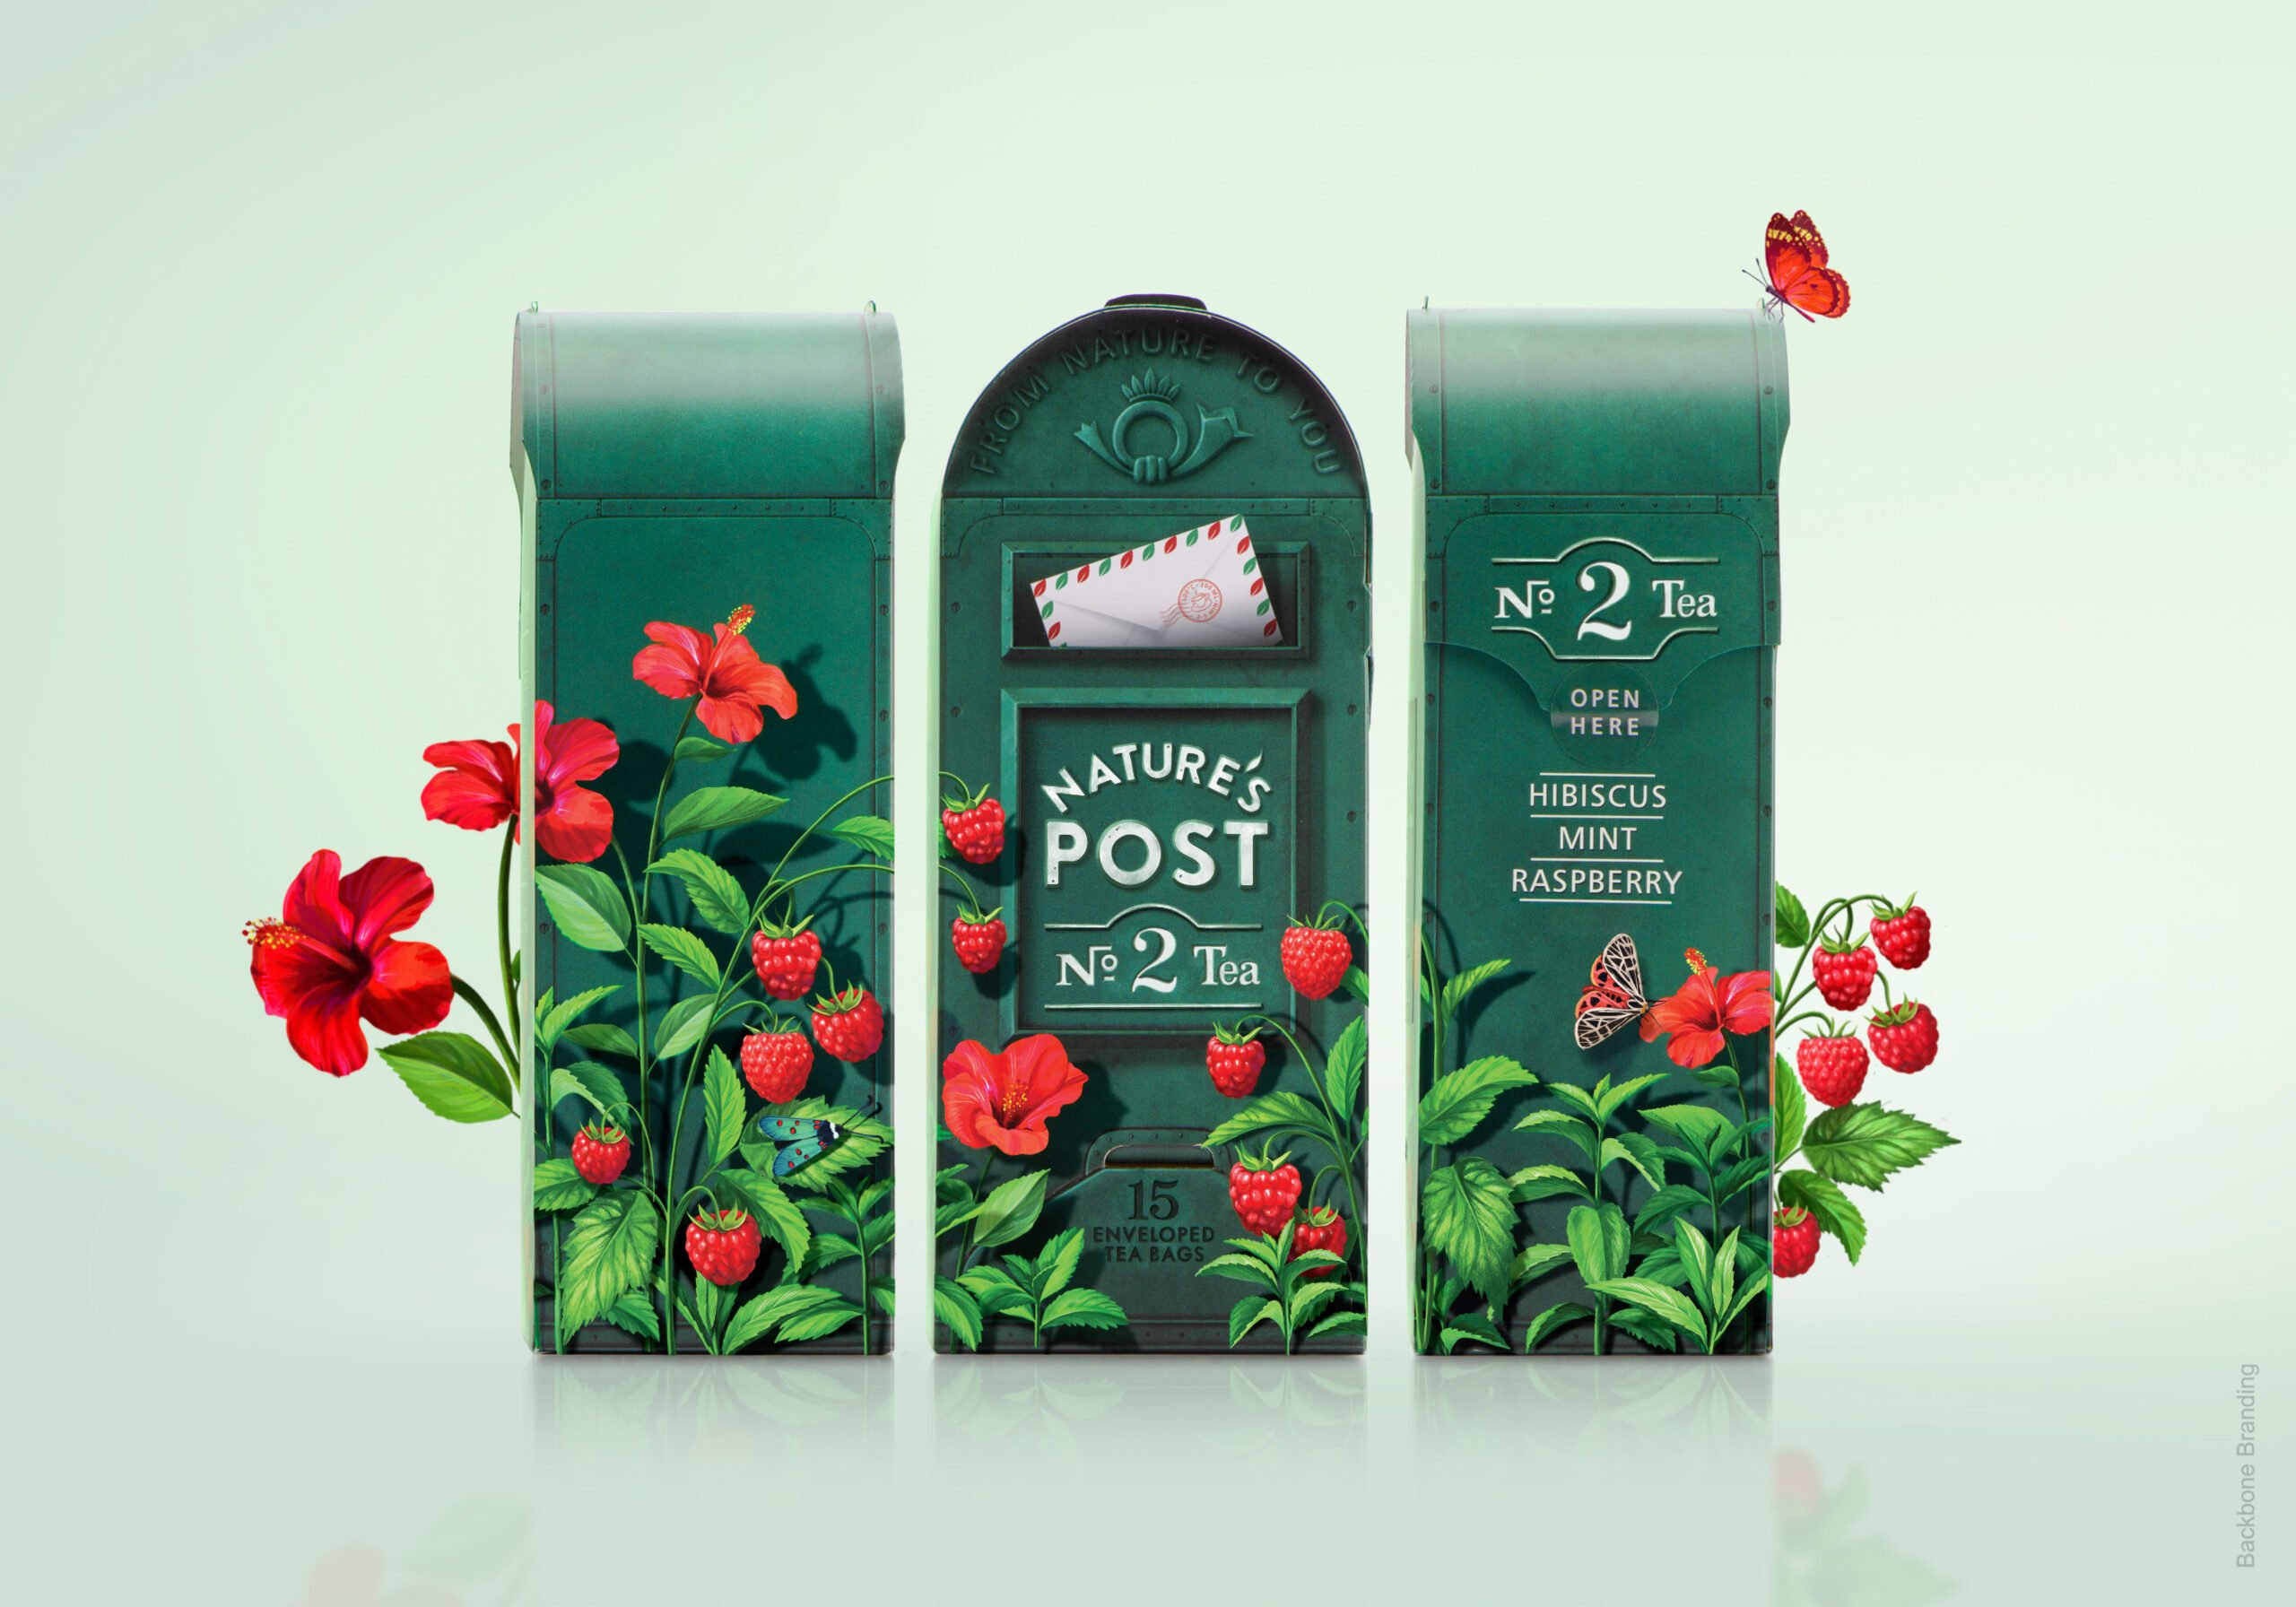 Nature’s Post Tea Comes in a Tiny Mailbox That Would Look Extra Sweet on a Kitchen Counter